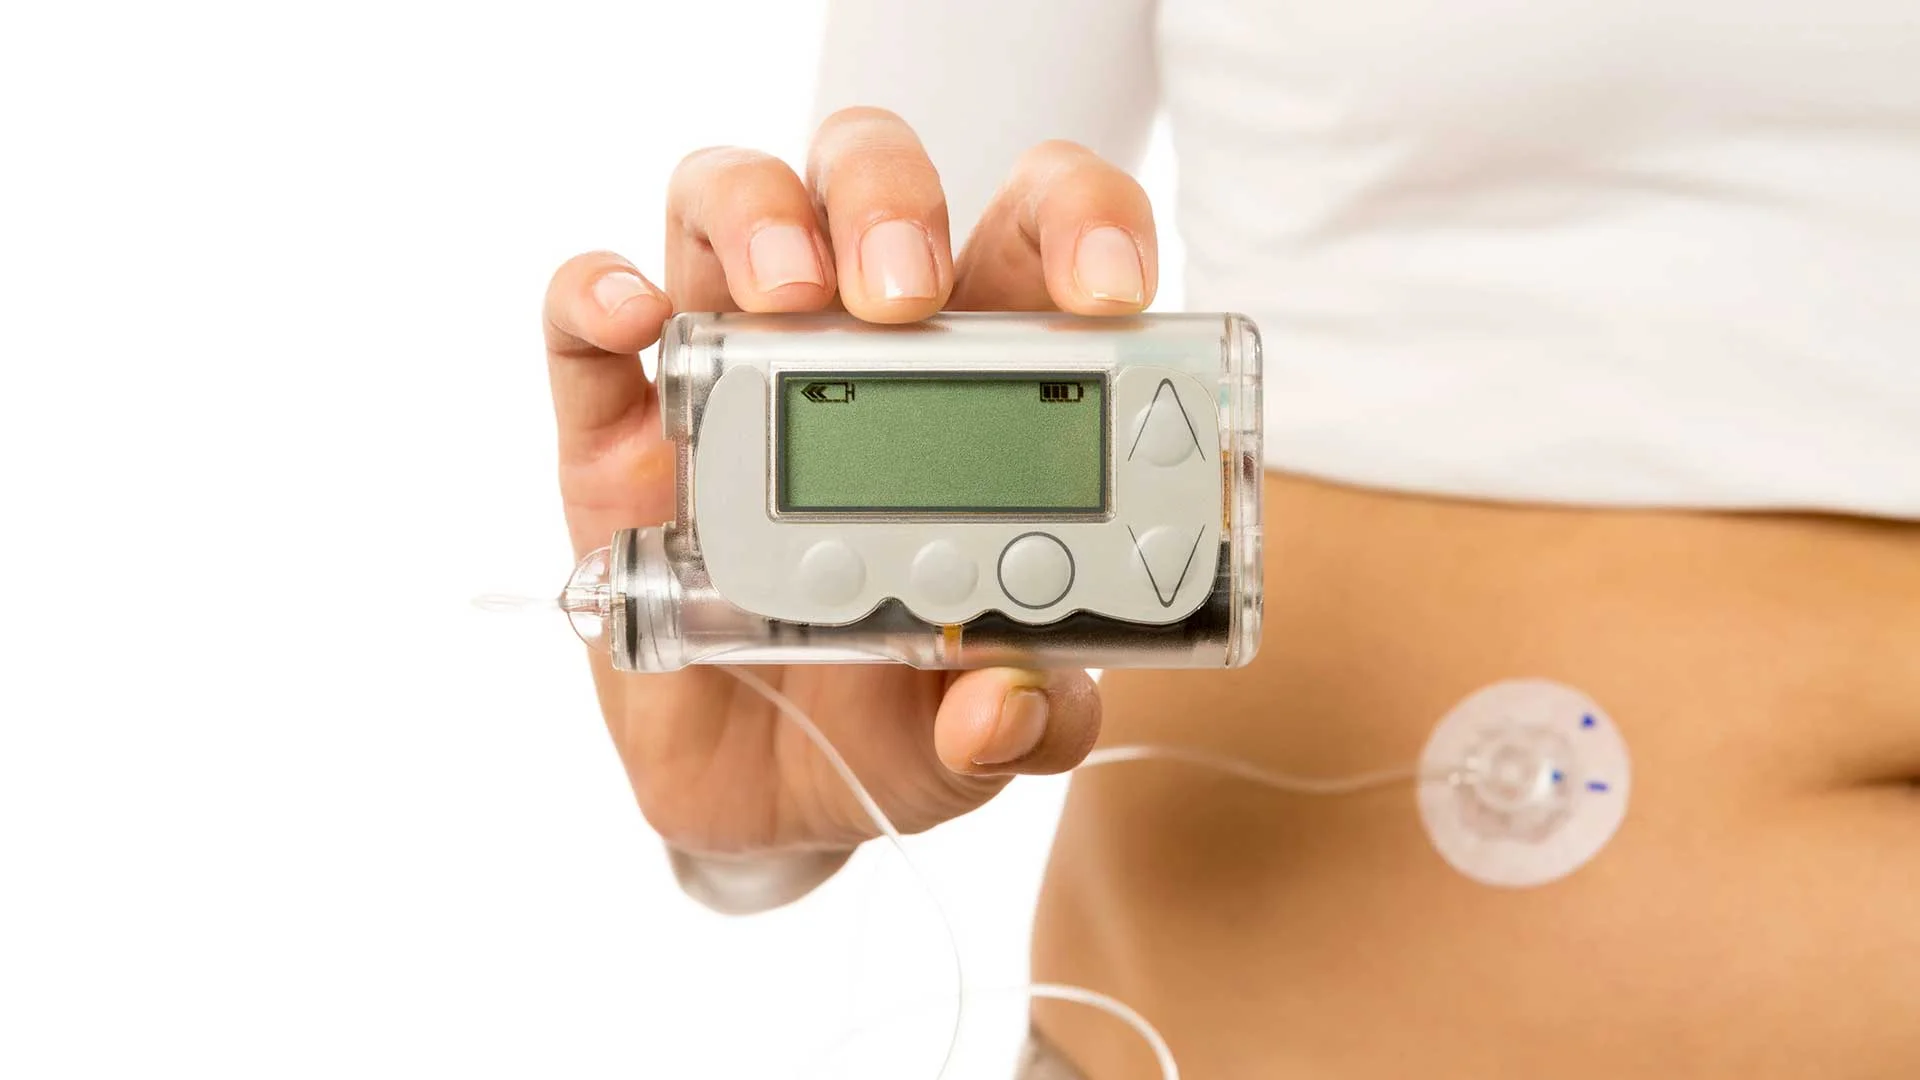 infusion site for insulin pump with tubing. This pictures shows an